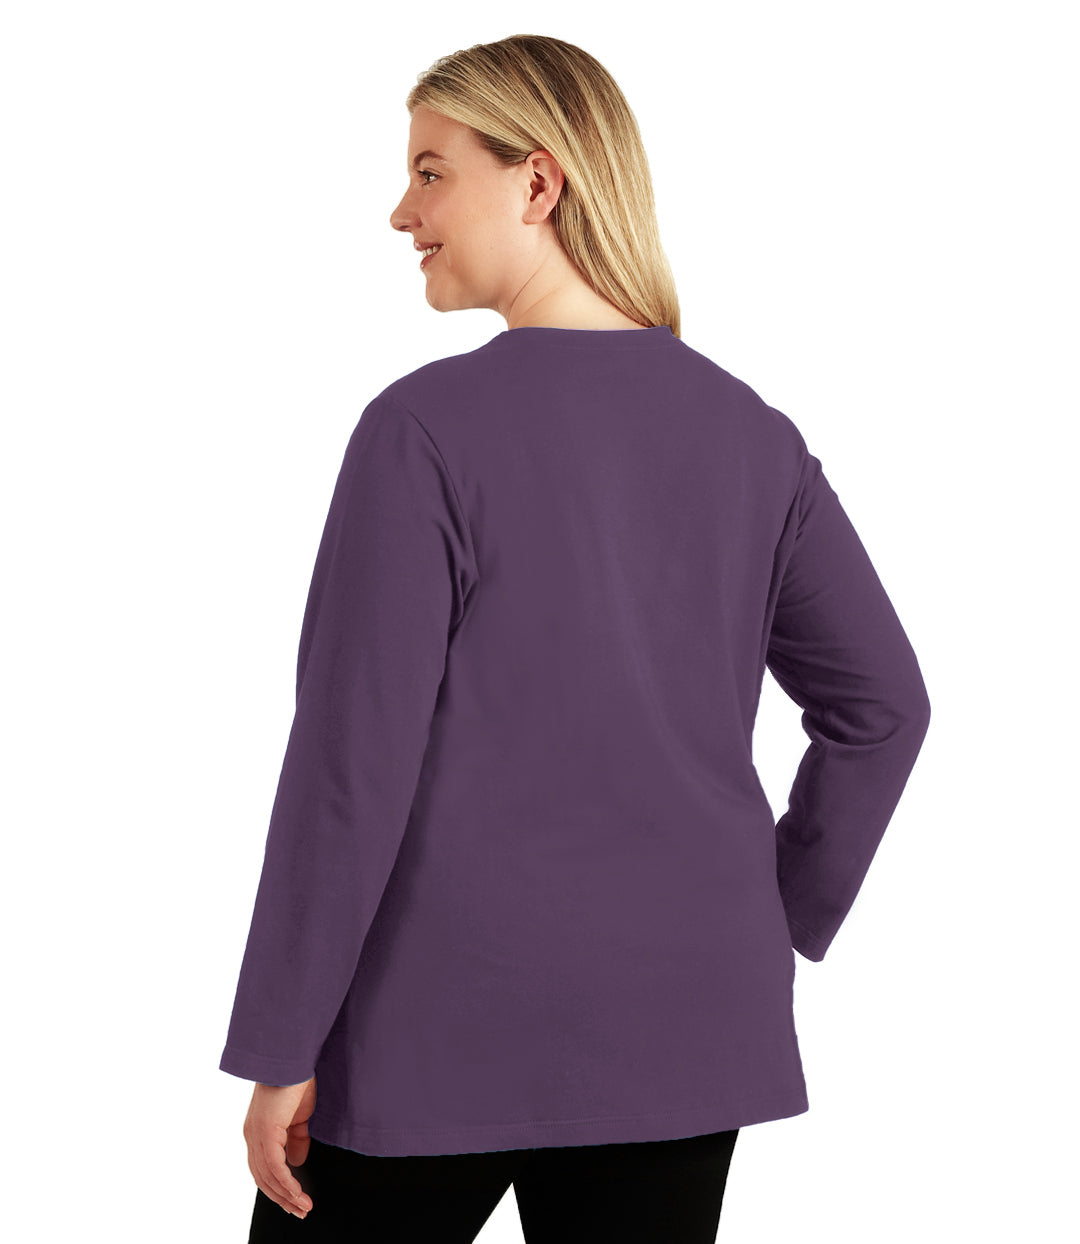 Plus size woman, facing back looking left, wearing JunoActive plus size Stretch Naturals Long Sleeve V-Neck Top in the color Black Berry. She is wearing JunoActive Plus Size Leggings in the color Black.